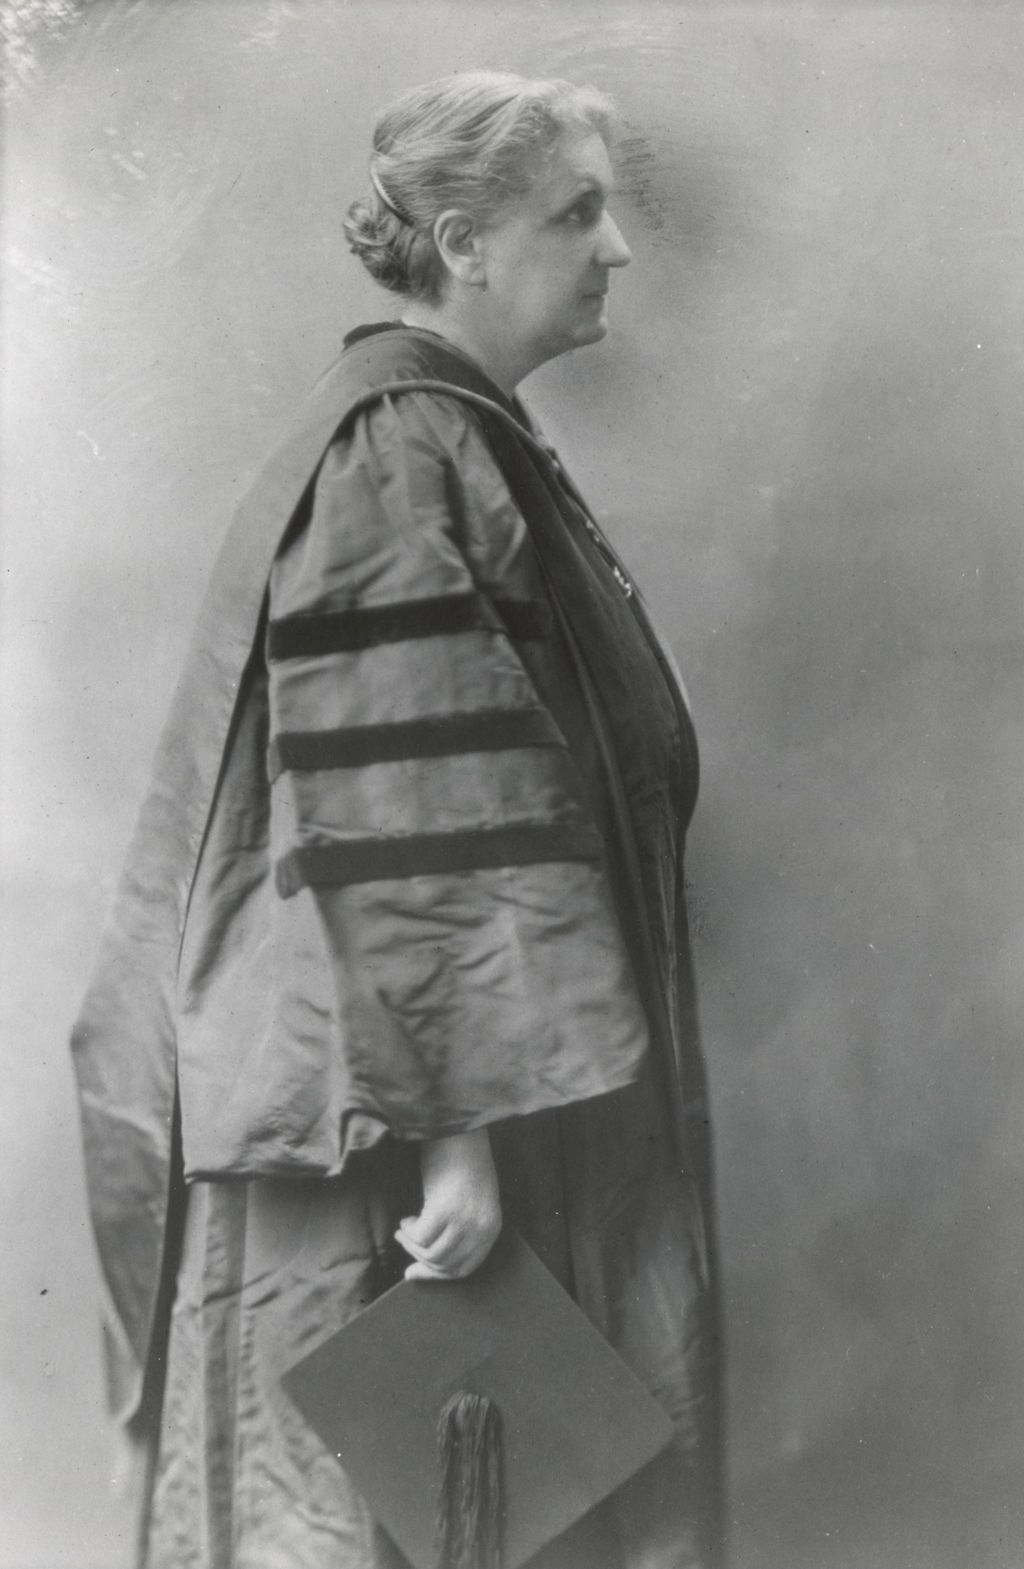 Jane Addams in academic robes